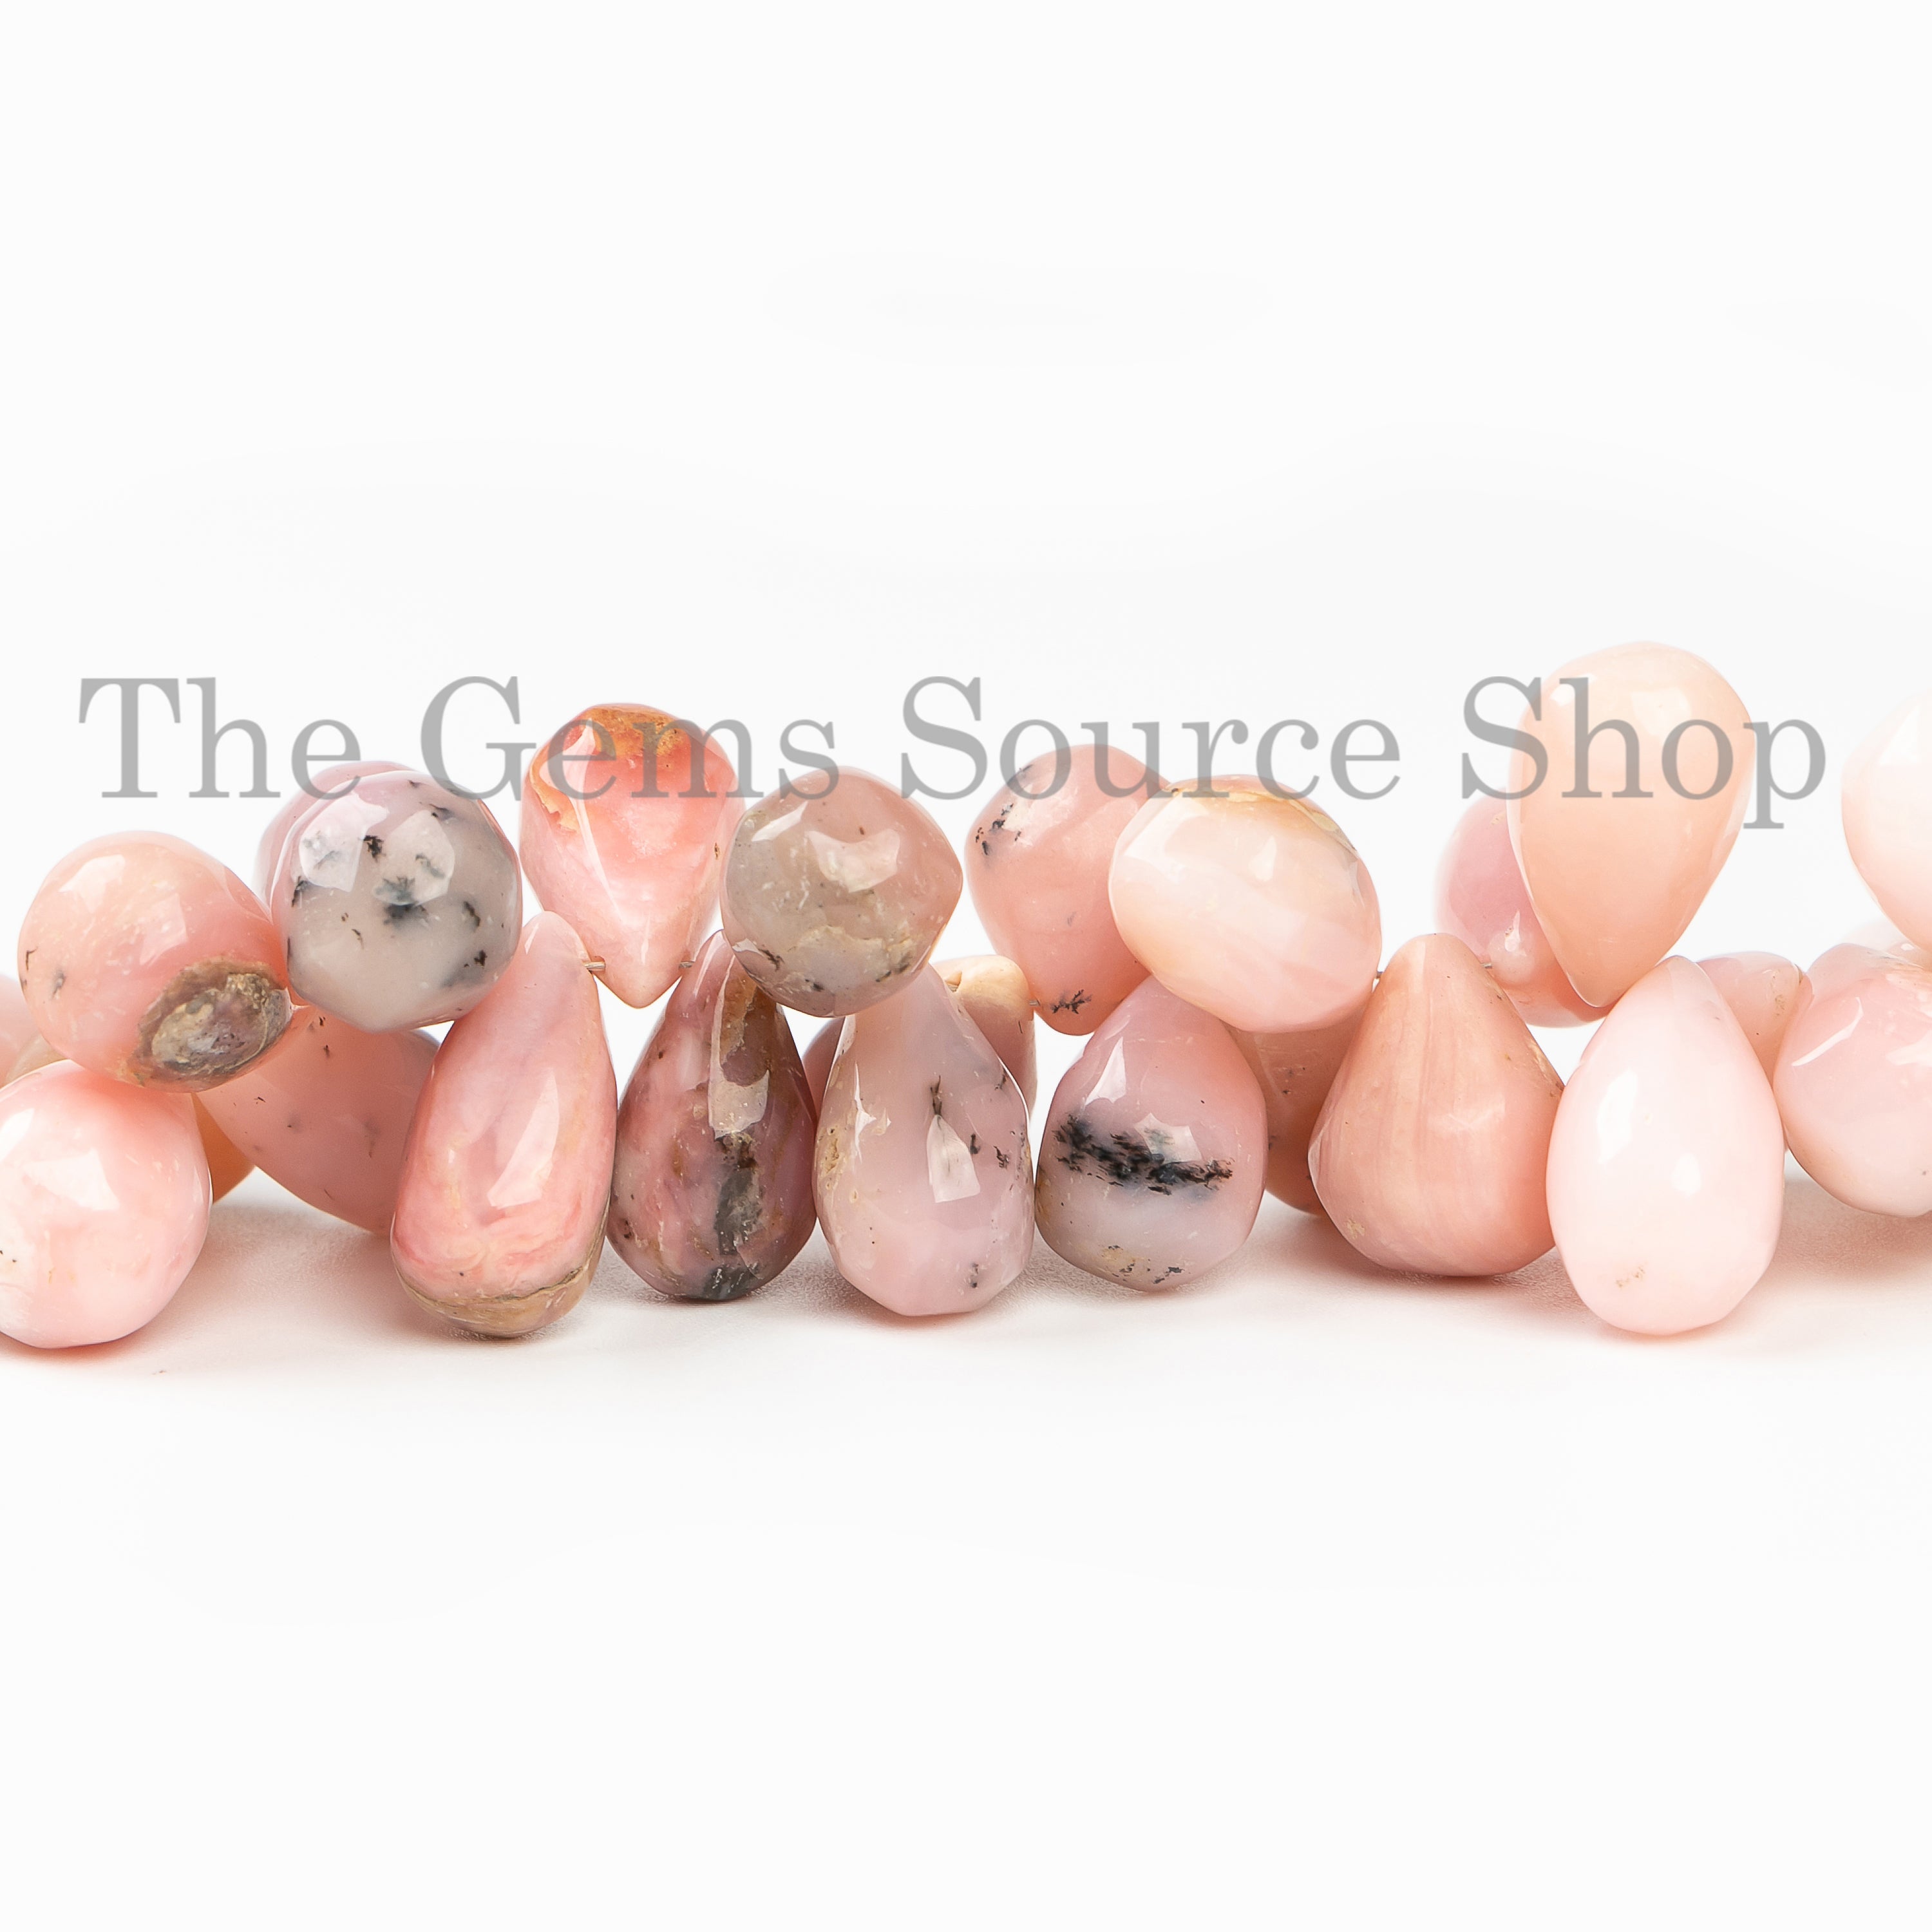 Natural Pink Opal Beads, Pink Opal Smooth Drops Beads, Straight Drill Beads, Wholesale Gemstone Beads